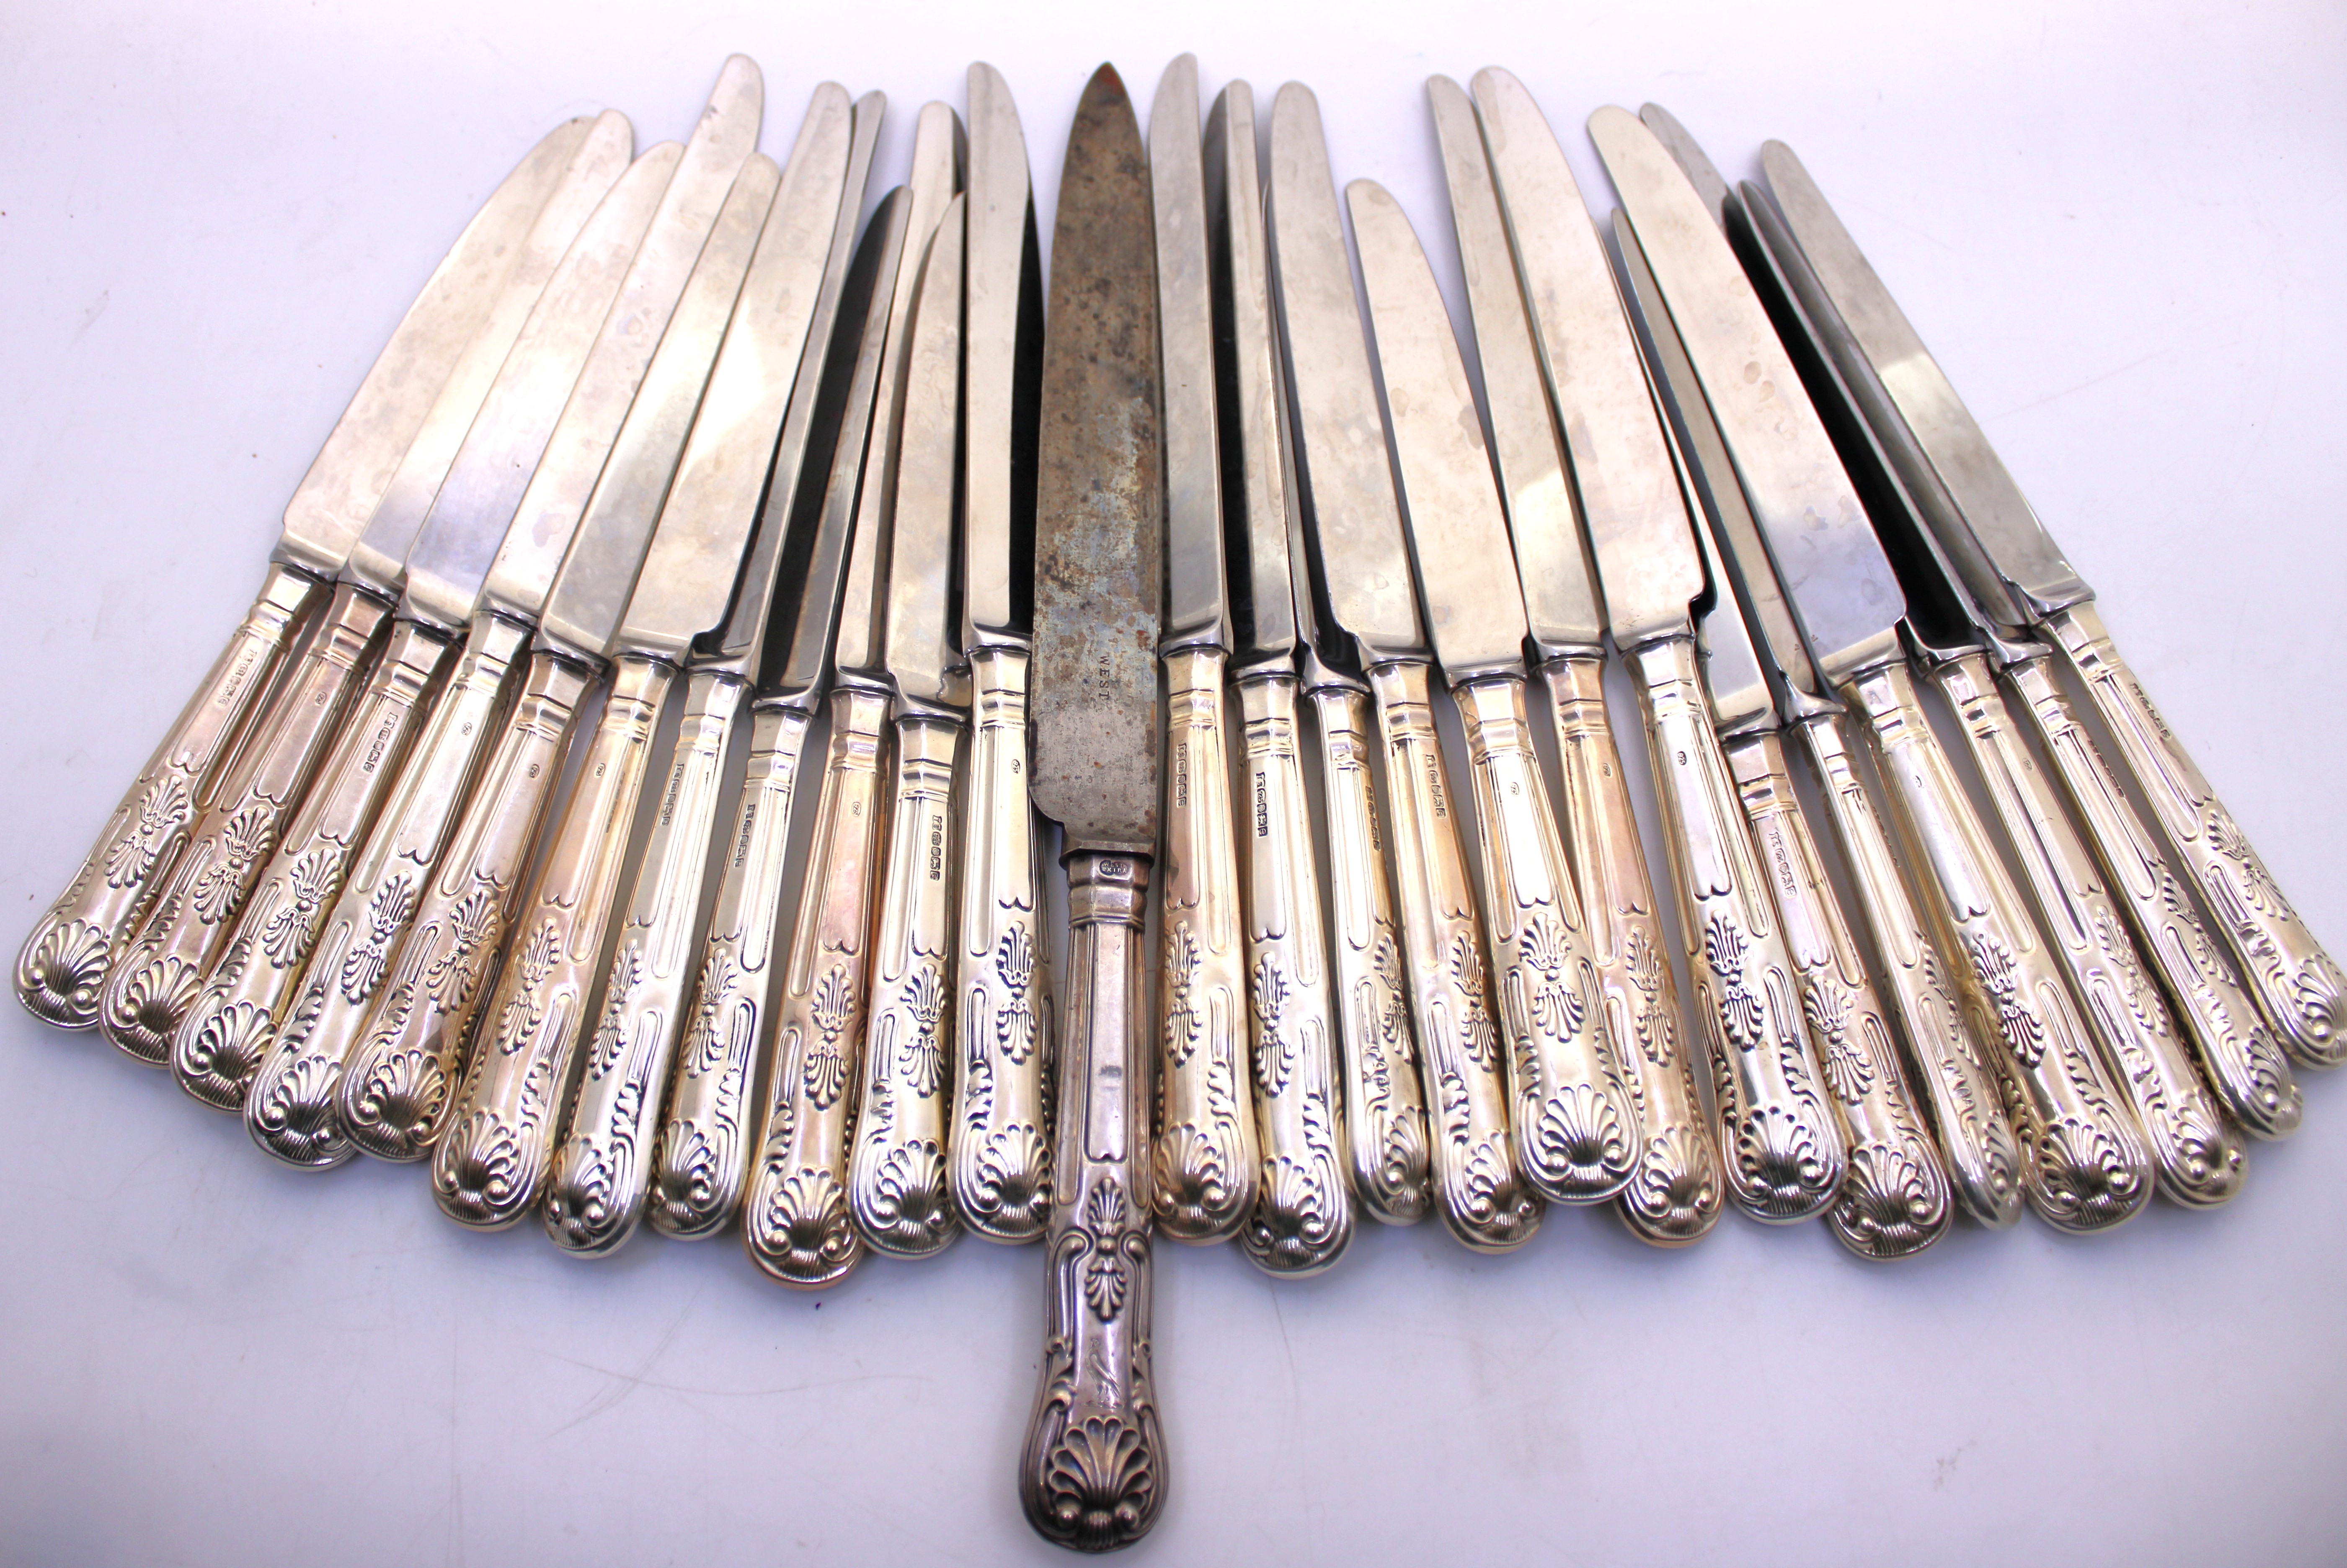 Twenty Four Sterling Silver Weighted Handled Knives. There is a Knife that is hallmarked on the